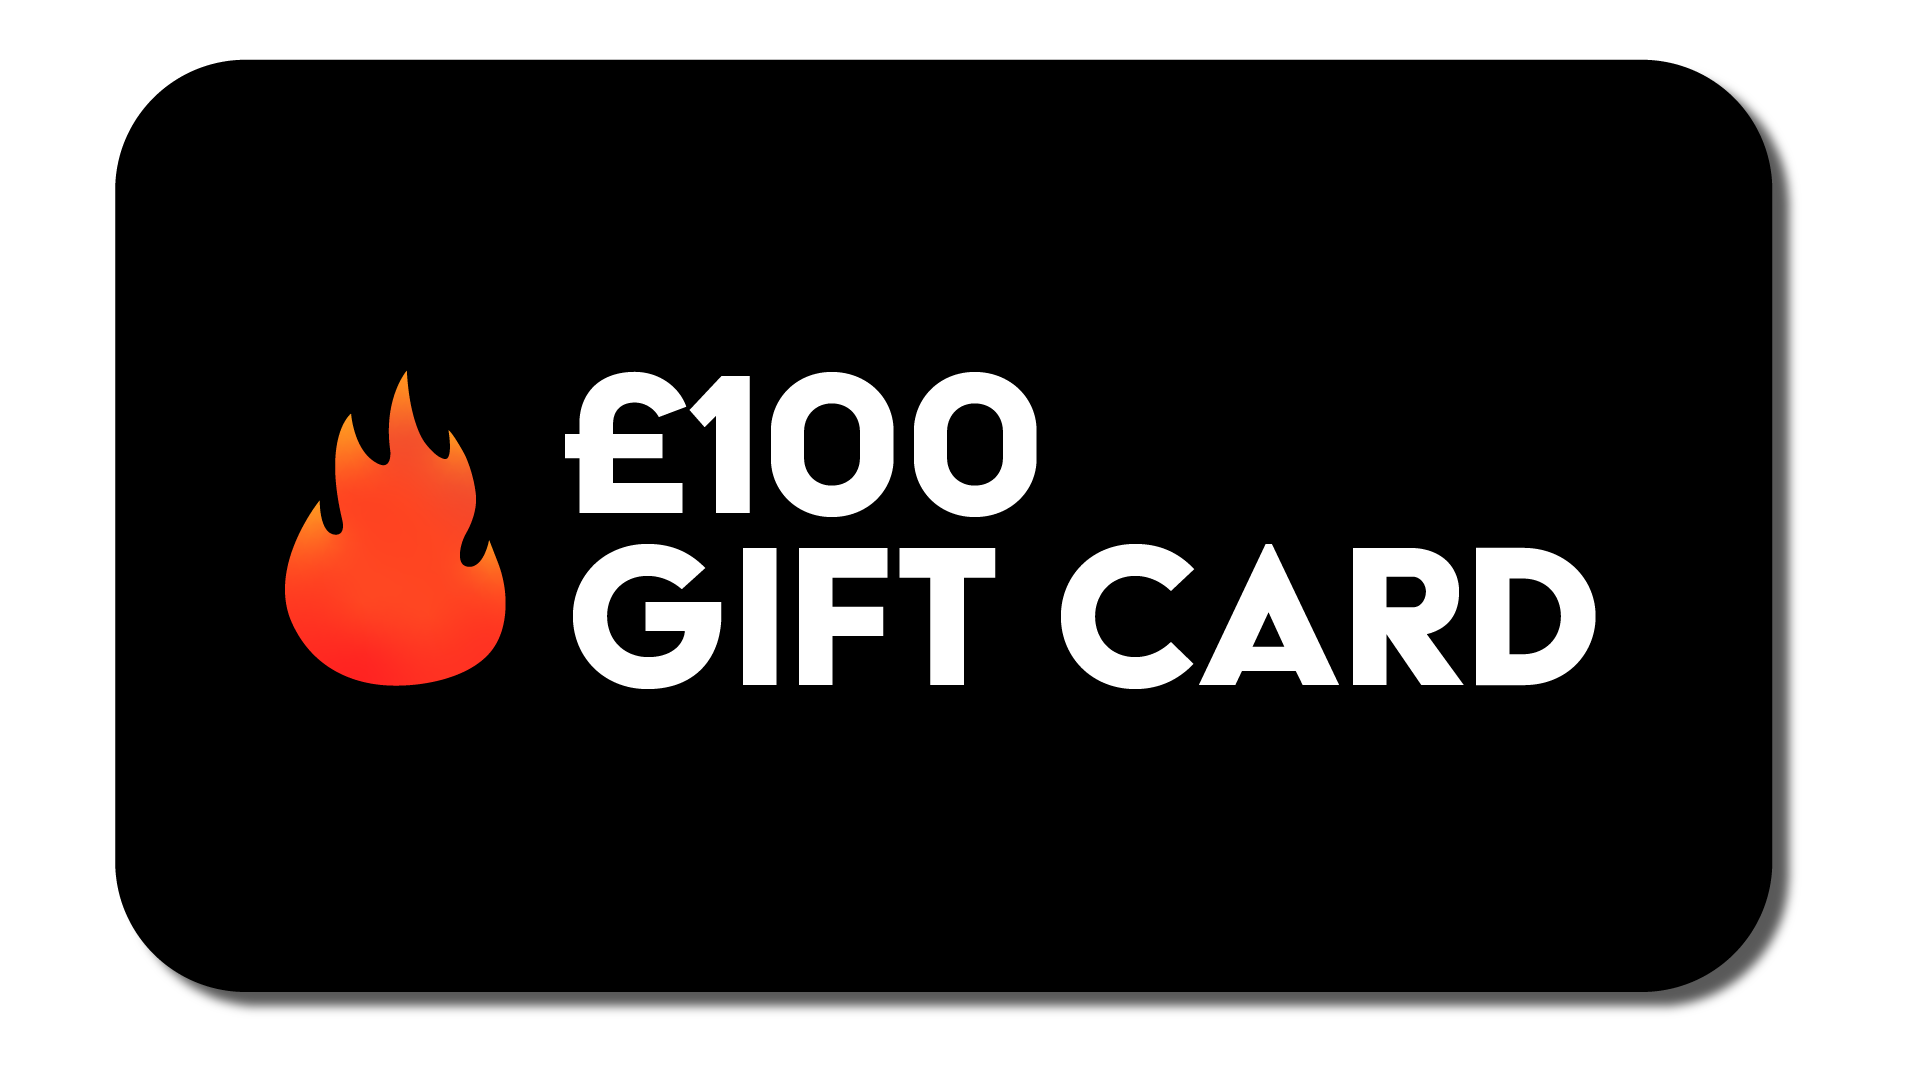 Crep Candle Gift Card